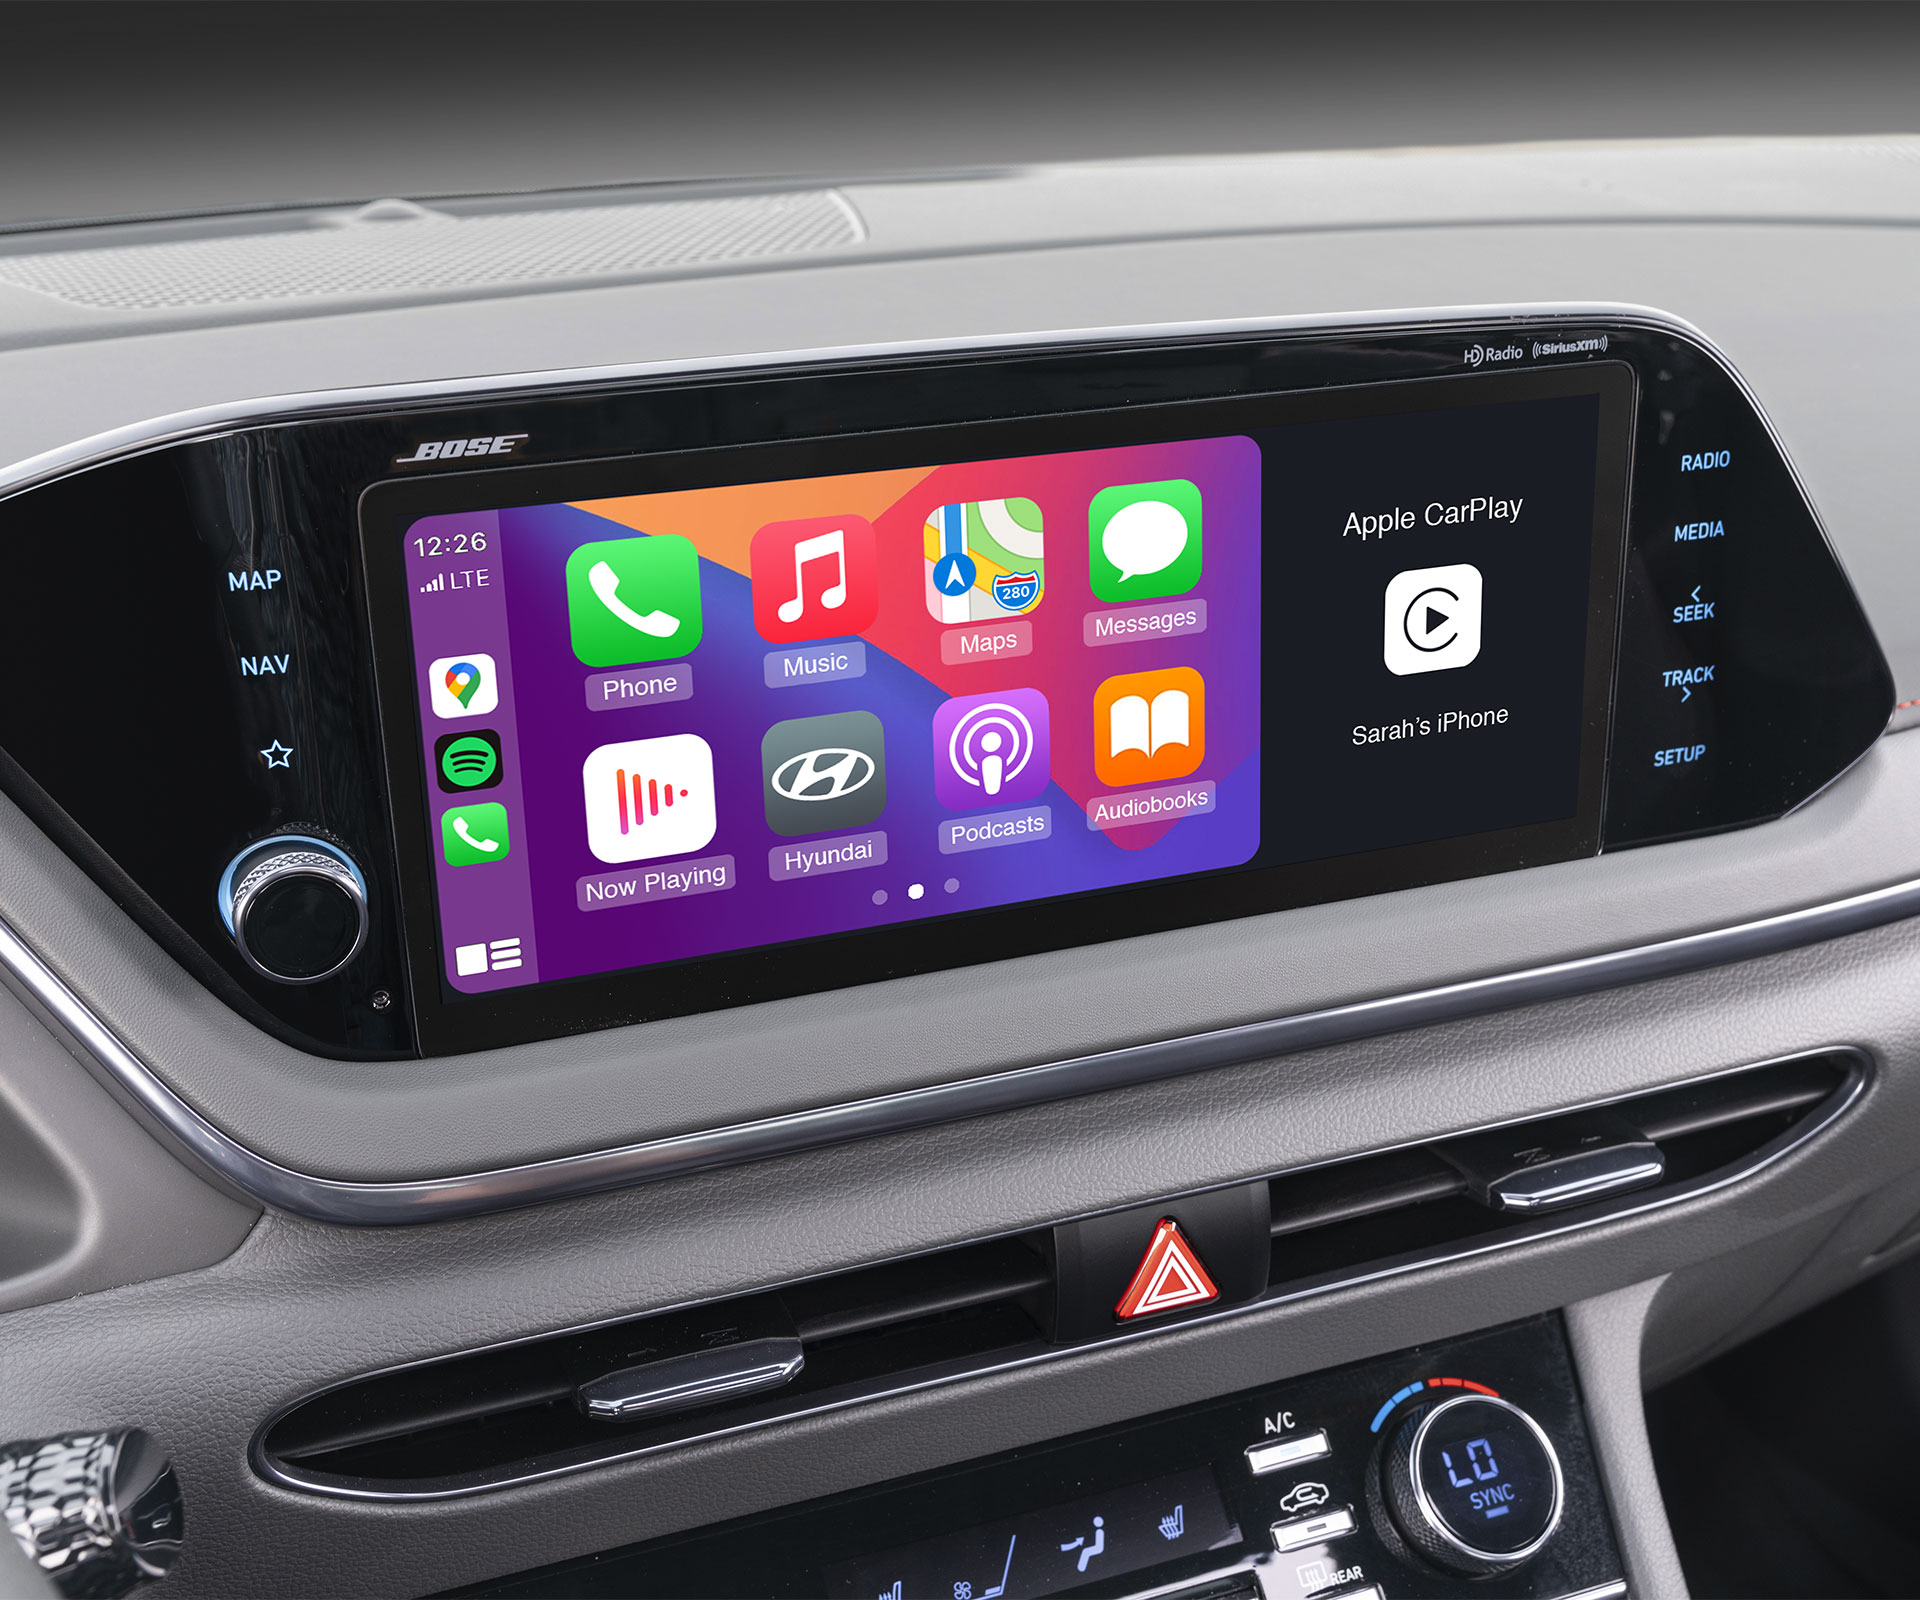 Interior image of the 2022 SONATA touch-screen display with wireless connectivity